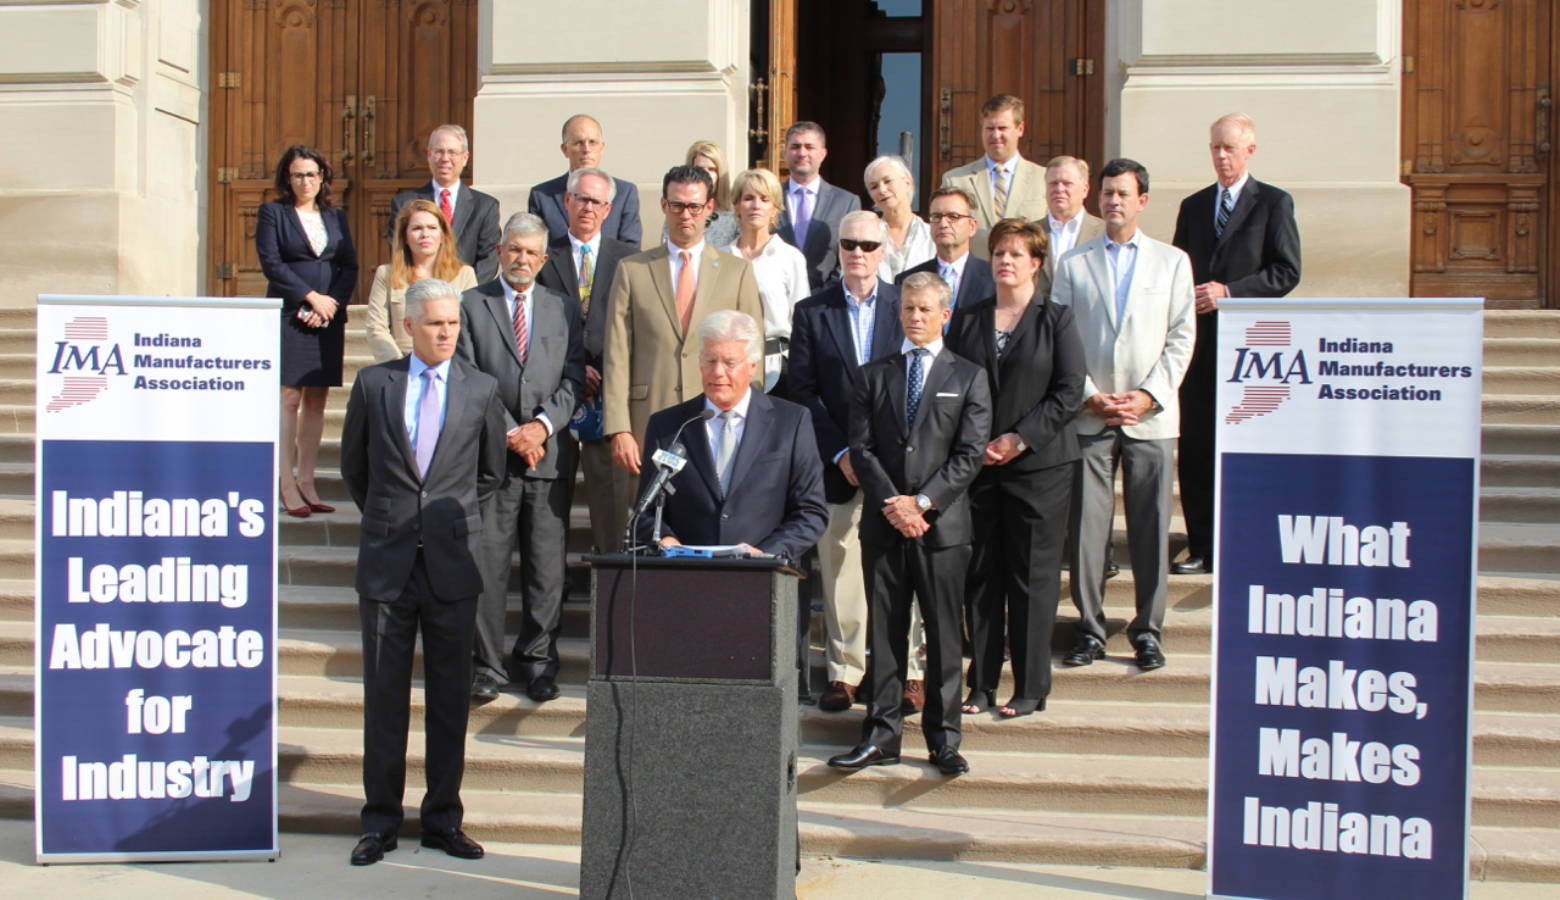 Indiana Manufacturers Association president Brian Burton laid out the industry's 2018 legislative priorities alongside Hoosier factory executives at the Statehouse Thursday. (Annie Ropeik/IPB News)